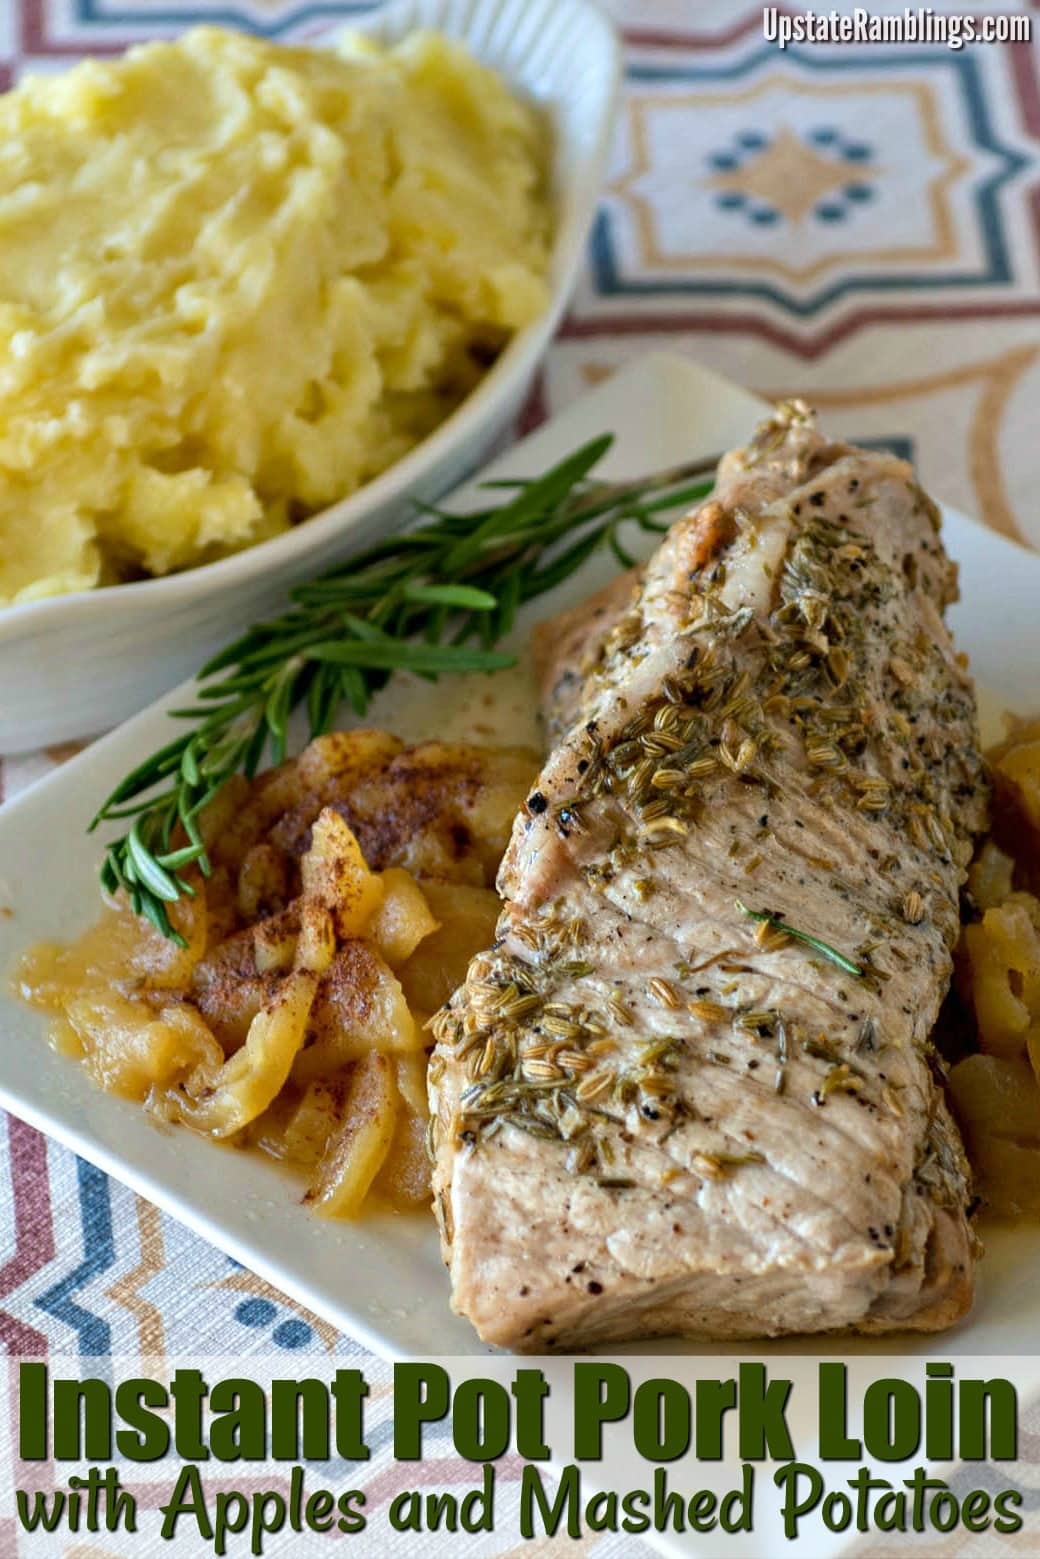 Instant Pot Pork Loin Recipe made with Apples and Mashed Potatoes